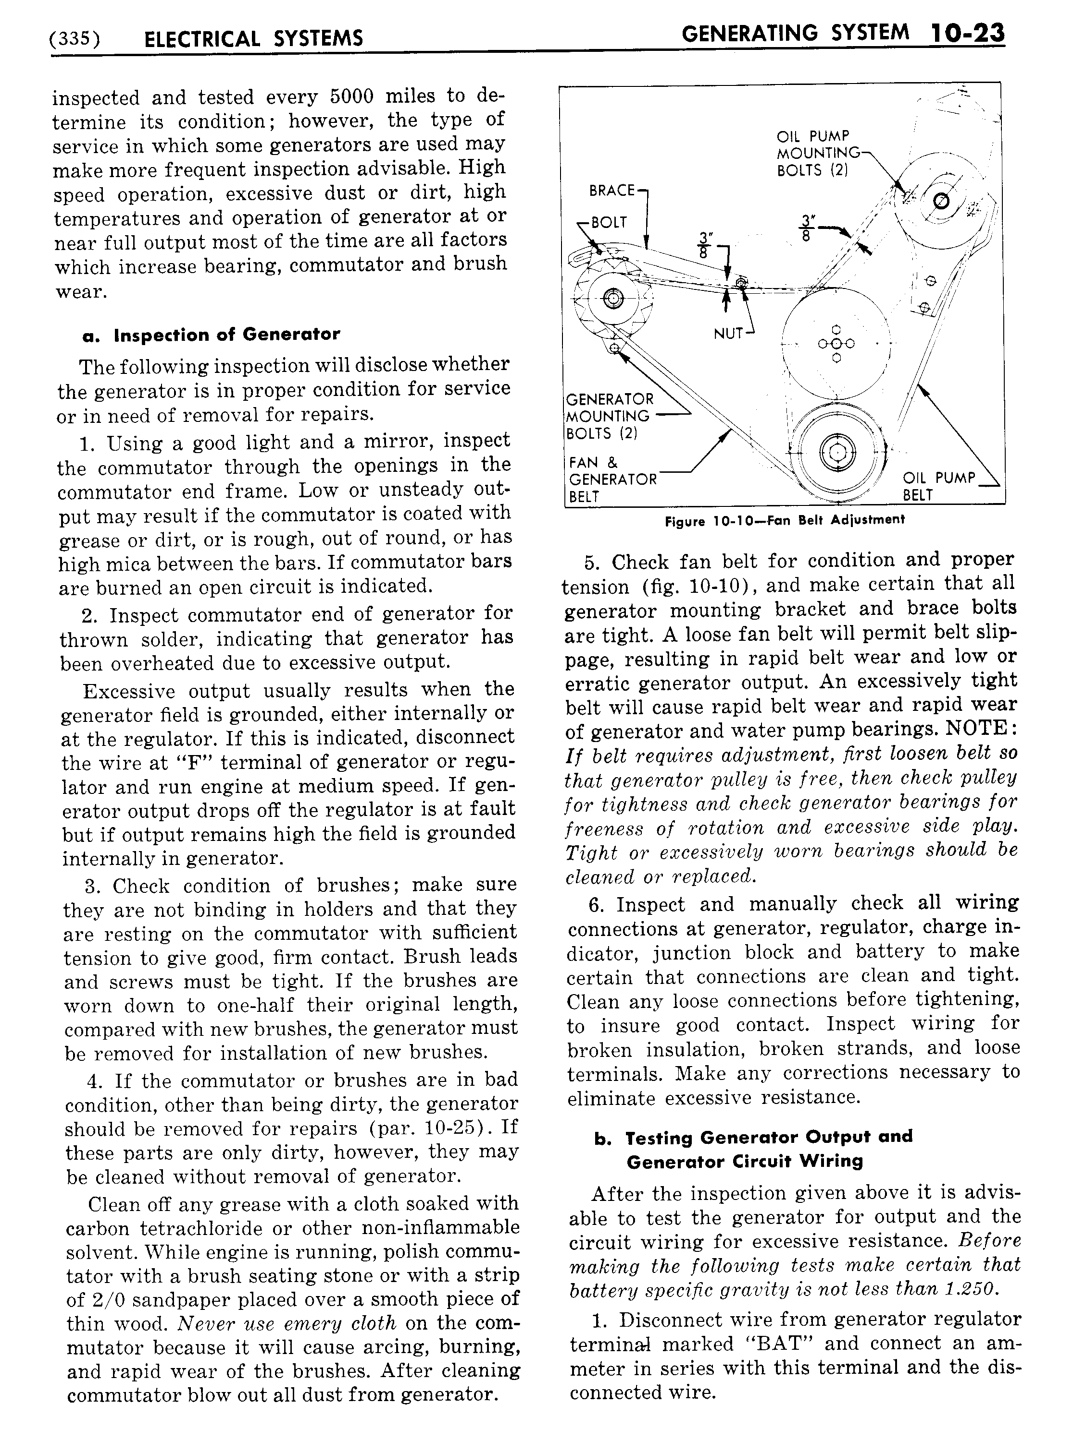 n_11 1954 Buick Shop Manual - Electrical Systems-023-023.jpg